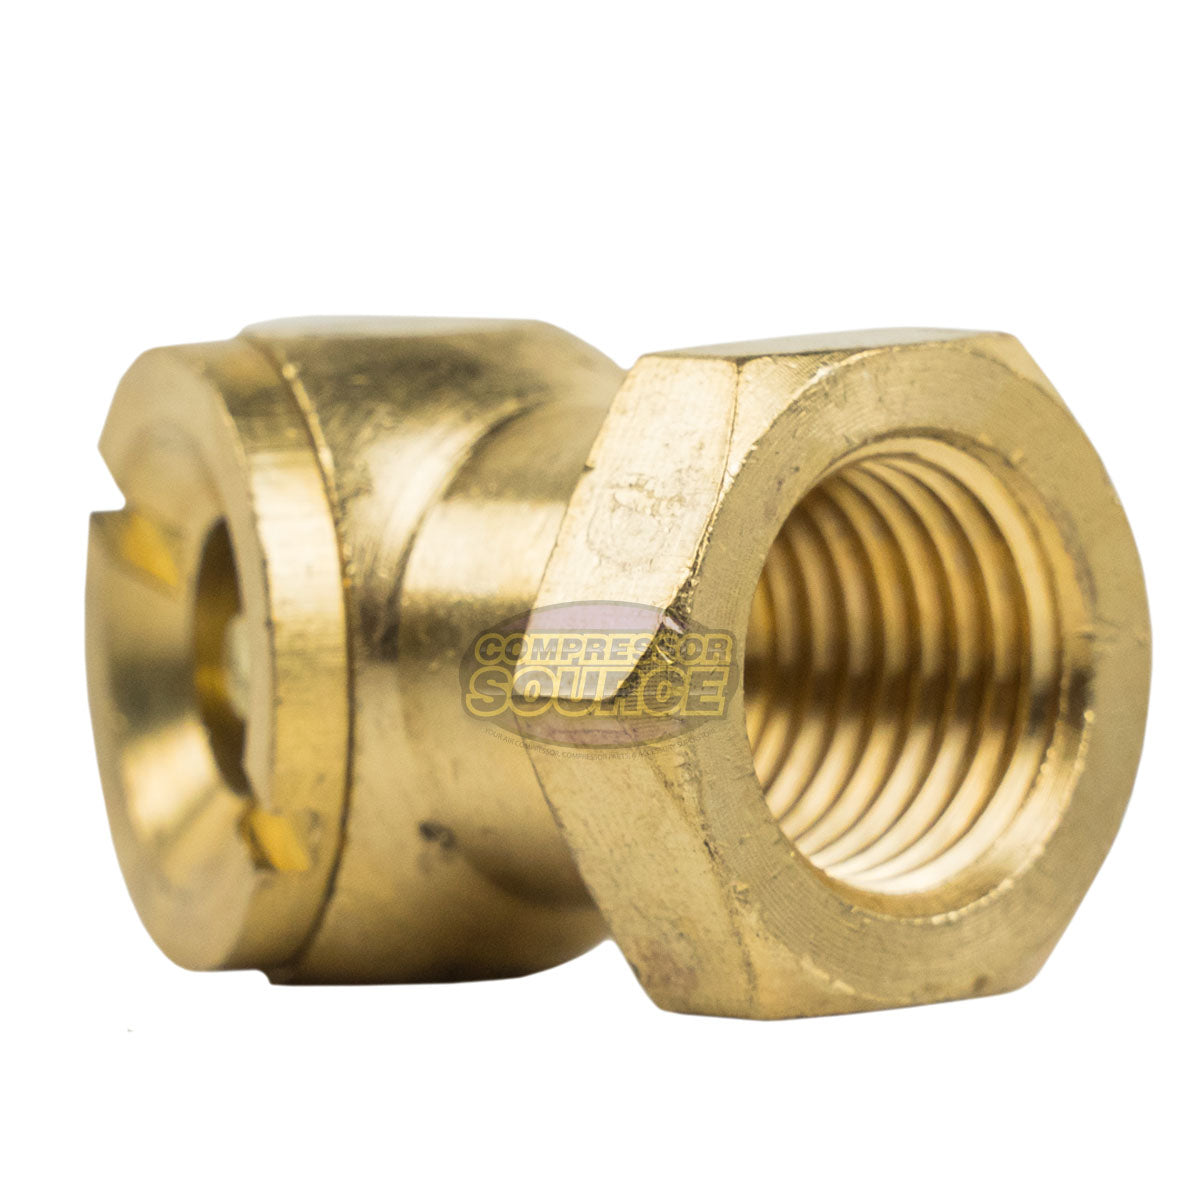 Coilhose 1/4" Tire Chuck Hex Foot Solid Brass Tire Inflator Air Hose Attachment